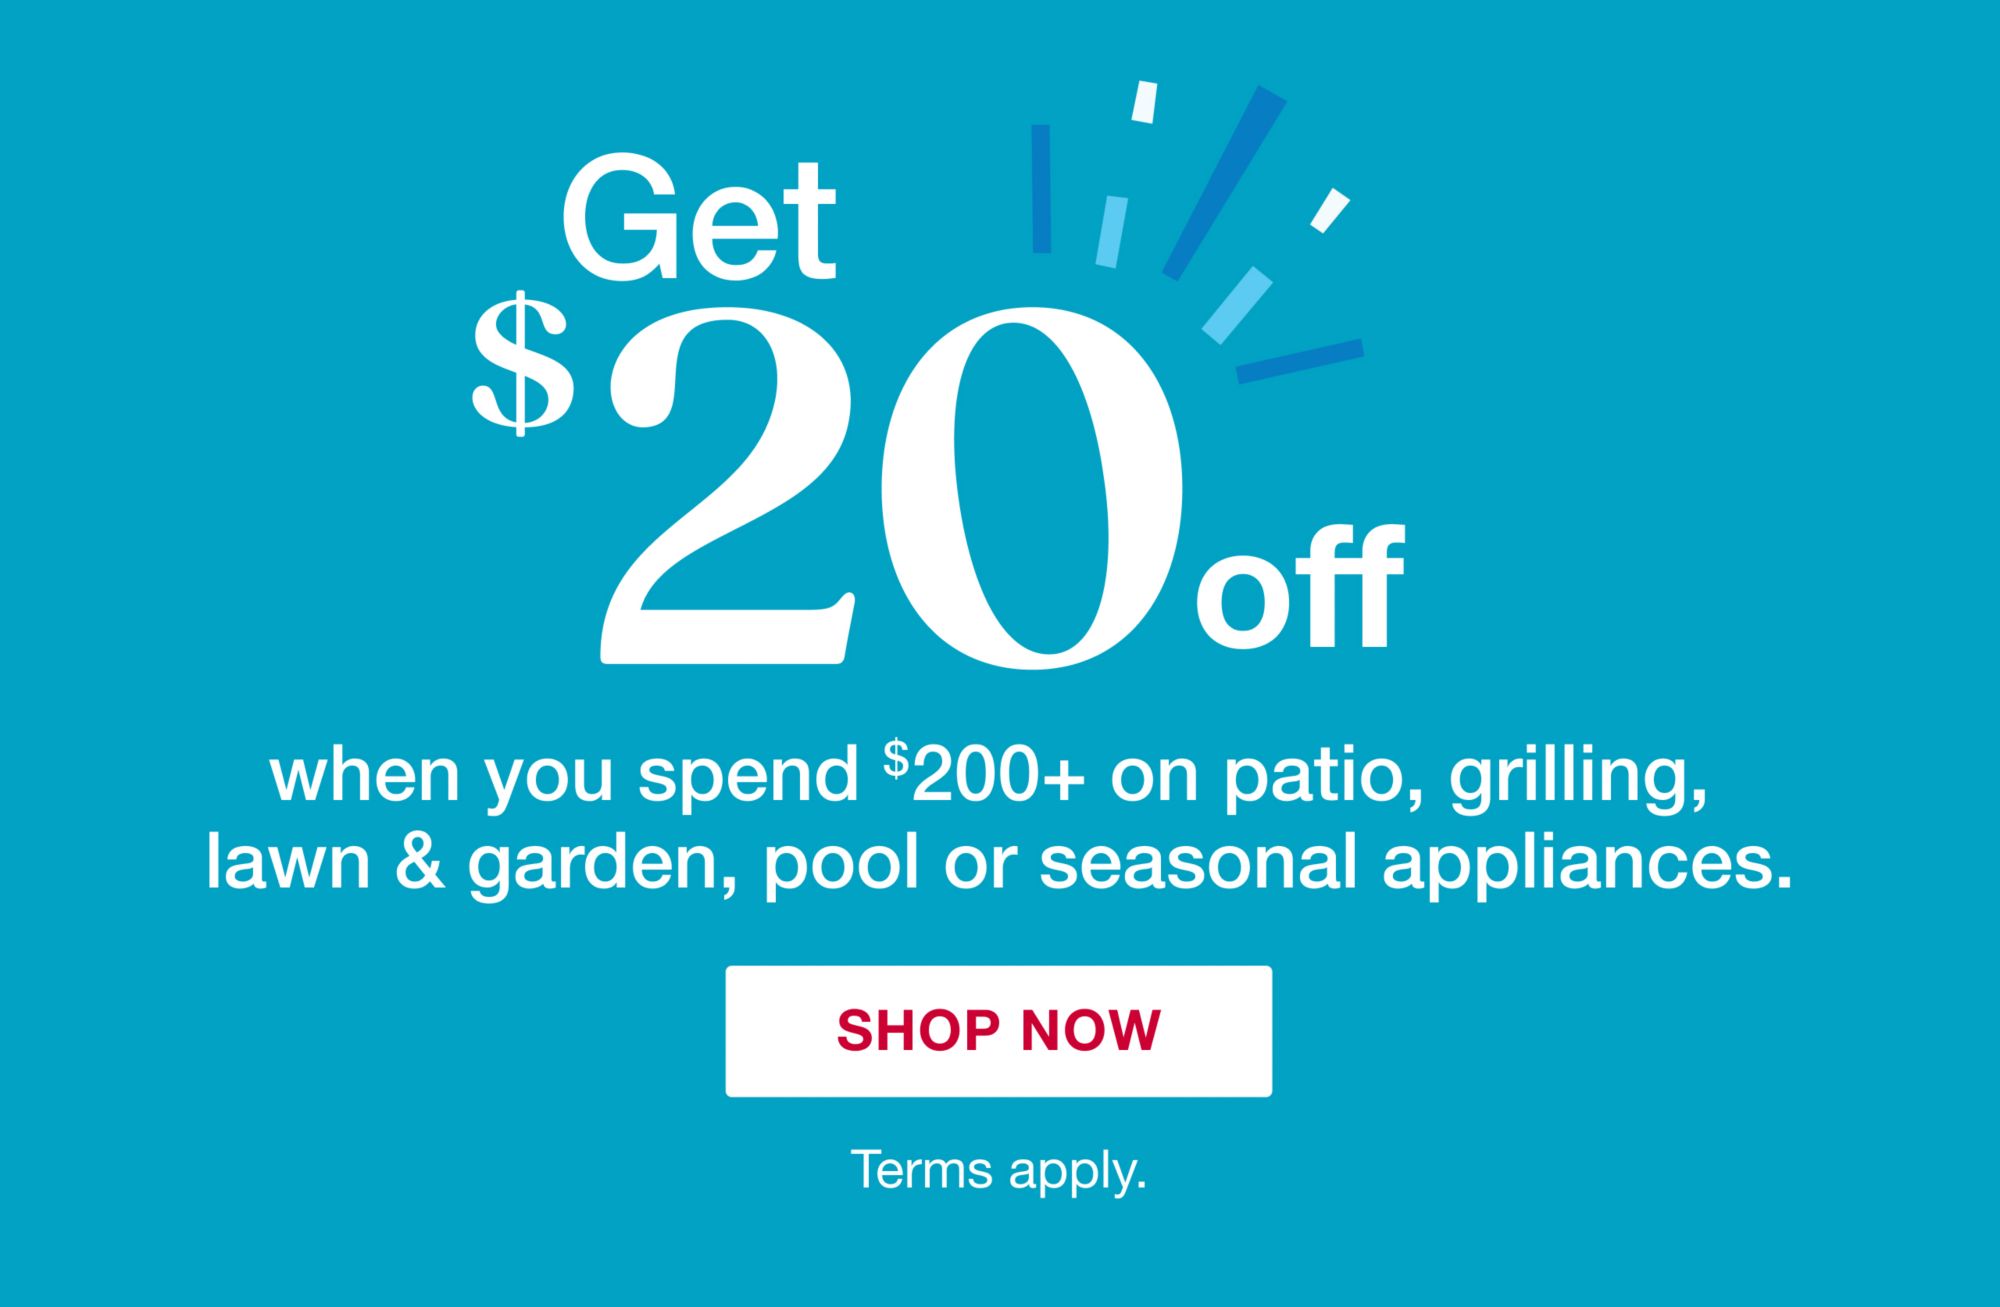 Get 20% off when you spend $200  on patio, grilling, lawn and garden, pool or seasonal appliances. Click to shop now